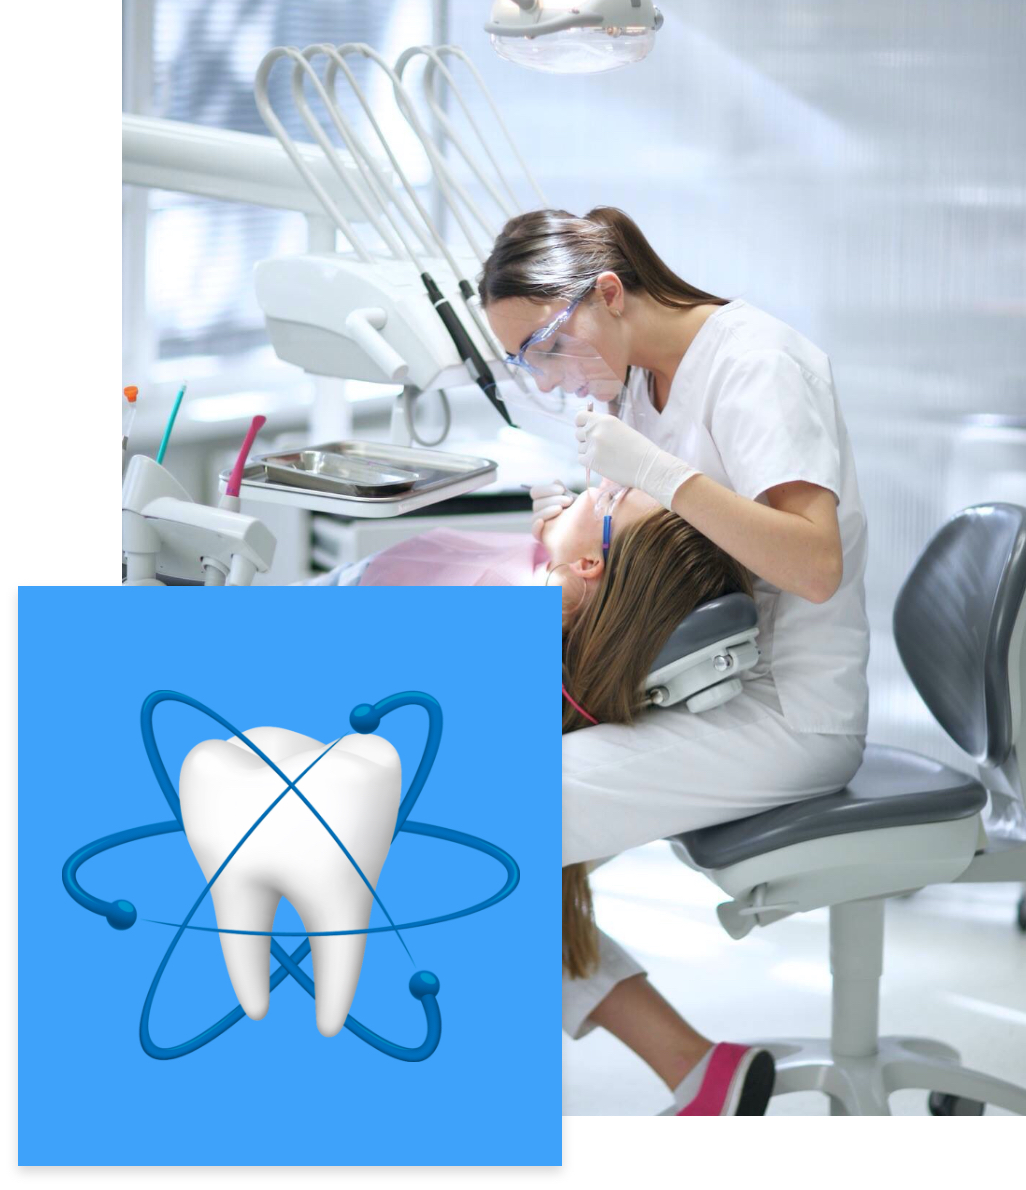 About Imperial Dental Services